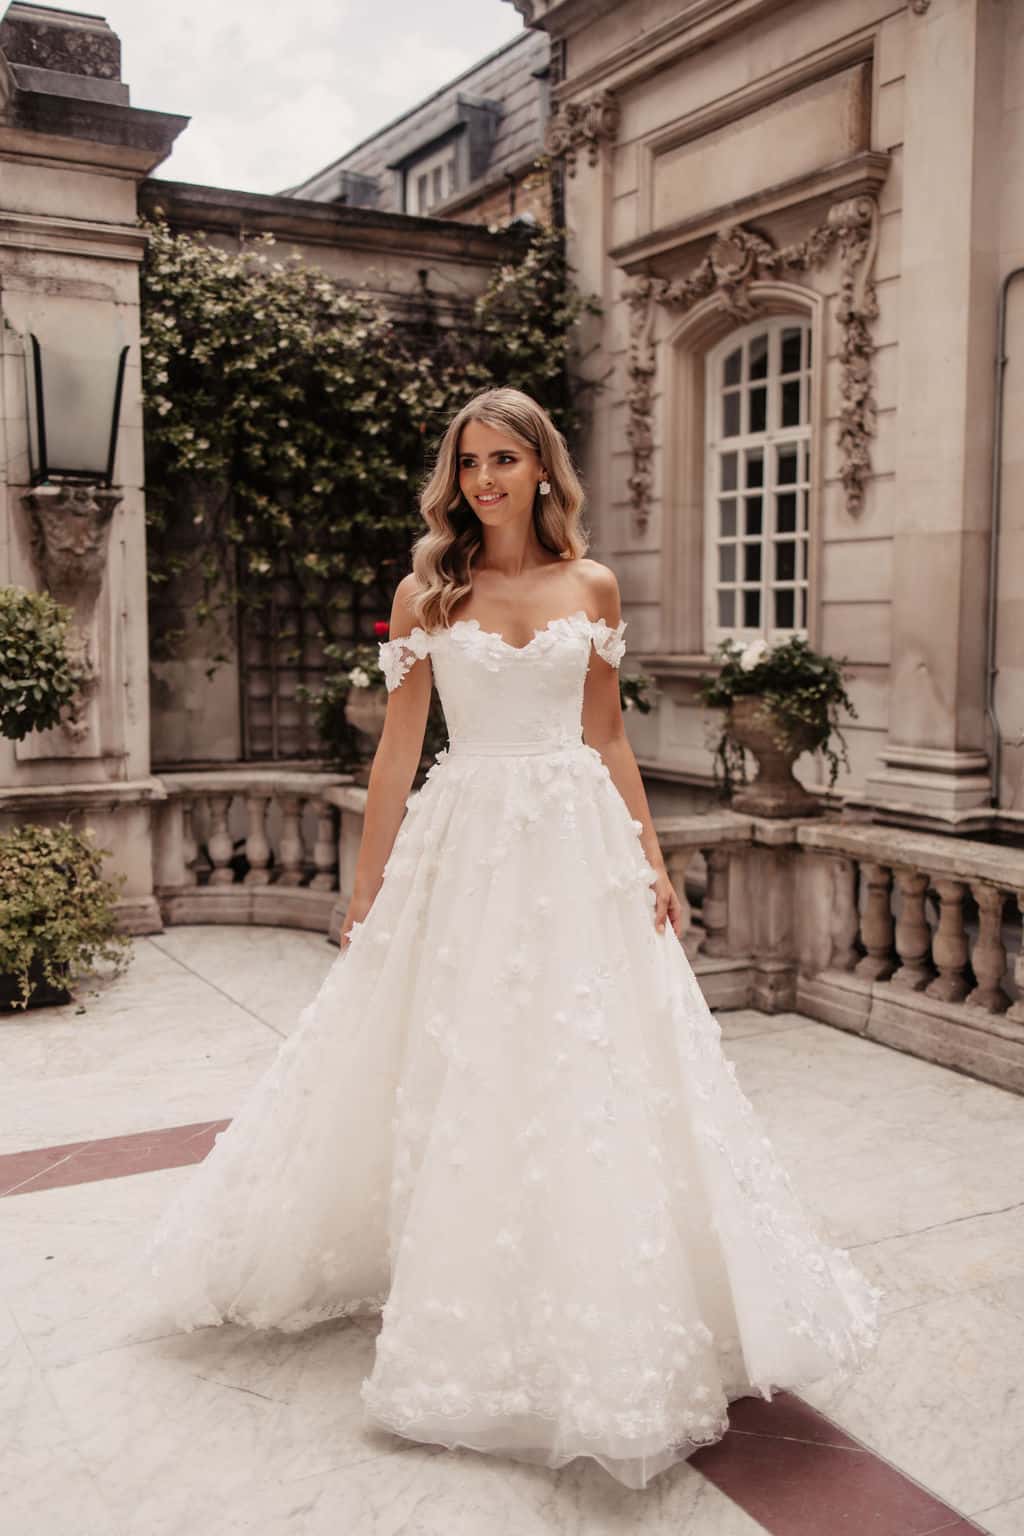 Bridal Designer Suzanne Neville Debussy Overskirt wedding gown has a corseted cupped bodice with off the shoulder floral straps and Debussy floral tulle overskirt. Find your wedding dress at Your Dream Bridal in near Boston.